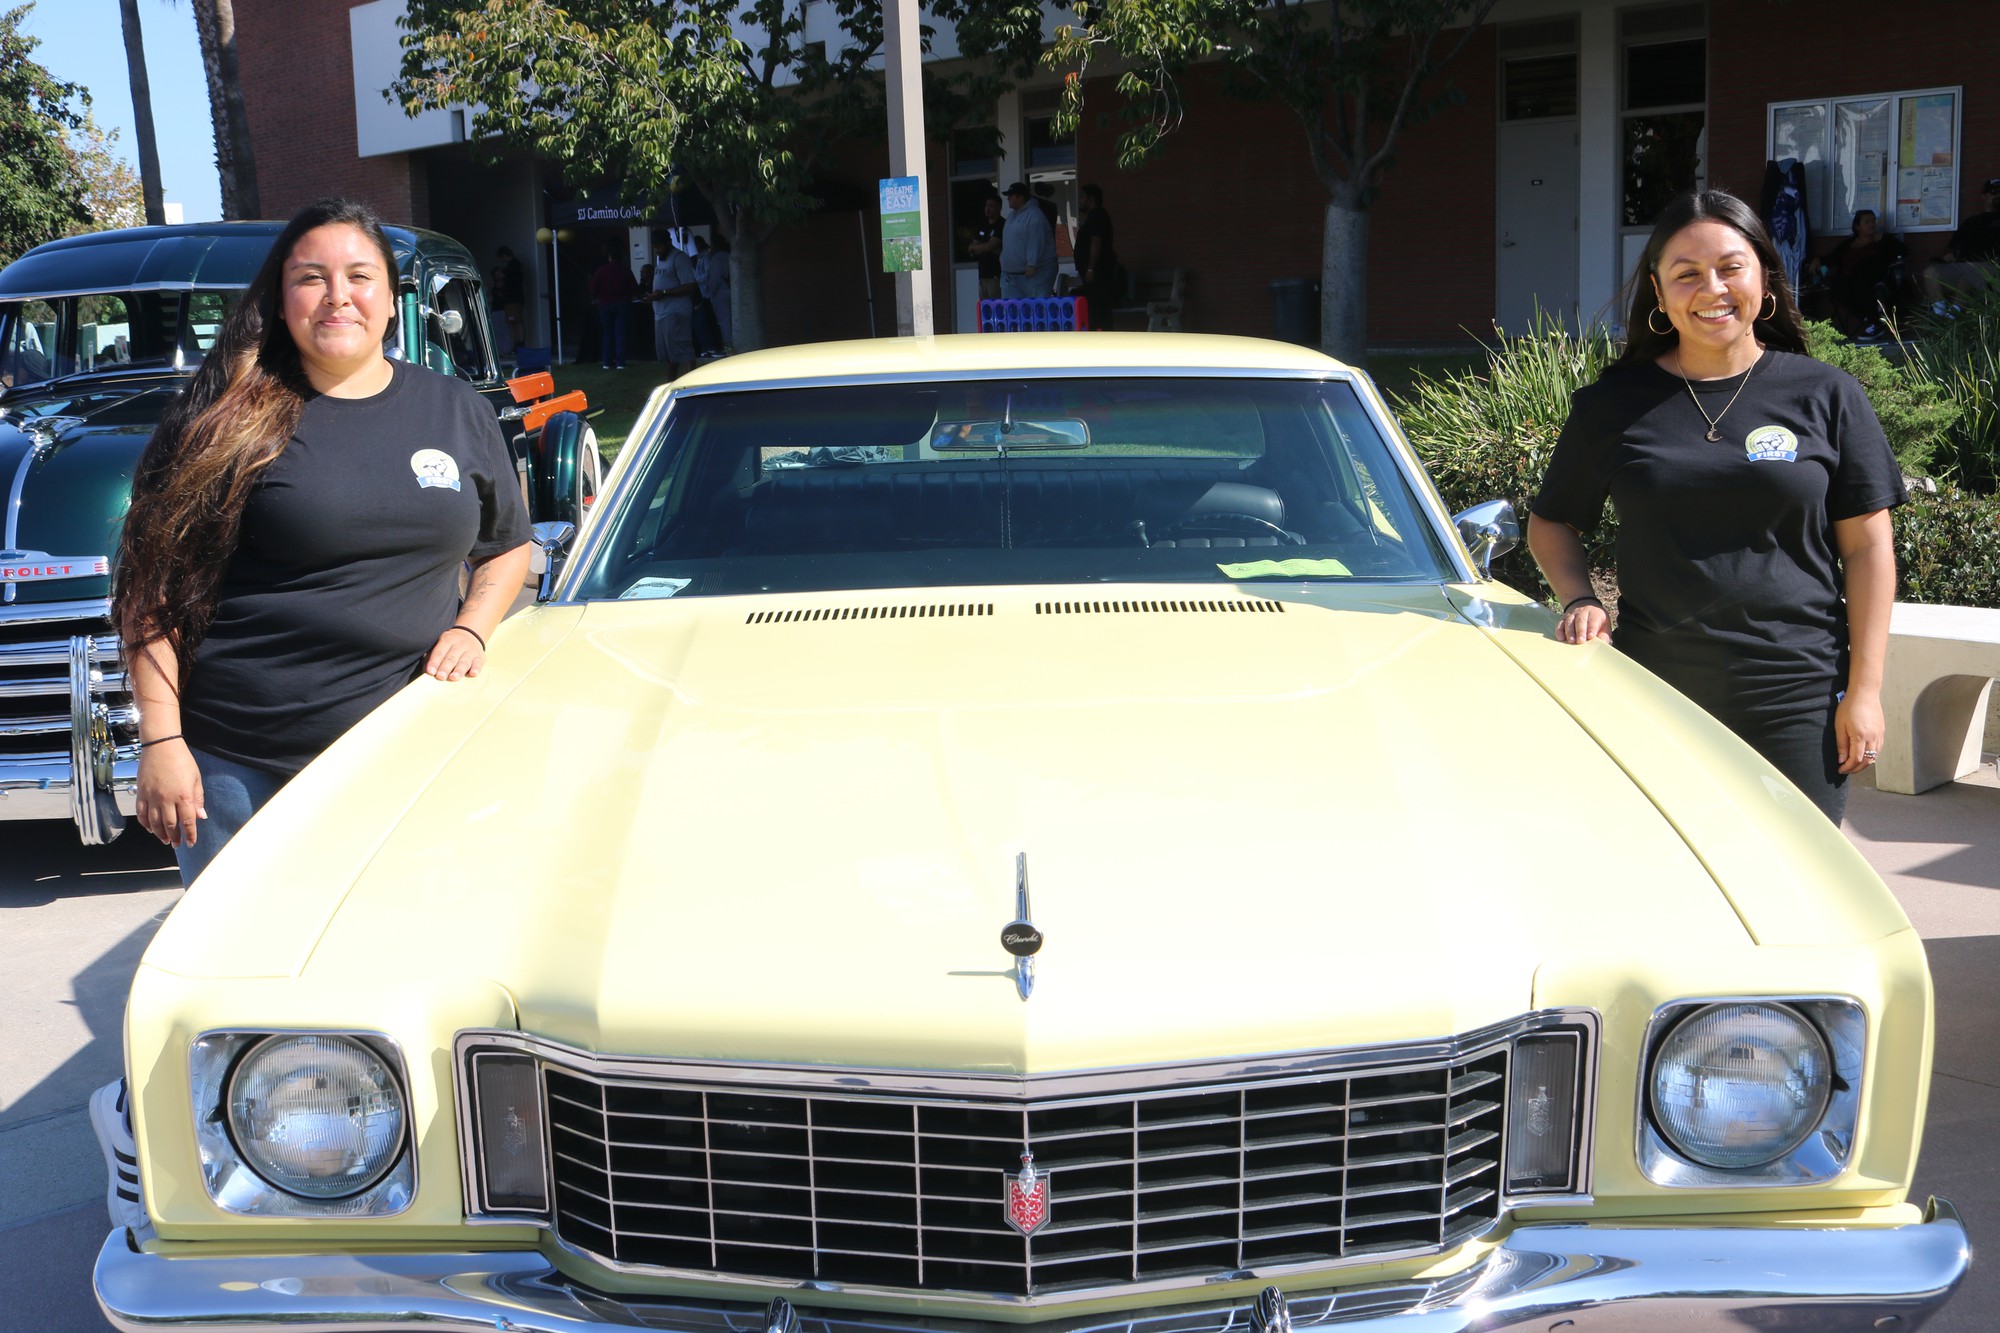 FIRST outreach specialist Isabel Gonzalez (left) poses with counselor Ruby Padilla (right) by the sides of a car on display for the programs orientation on Tuesday, Sept. 19. (Joseph Ramirez | The Union)